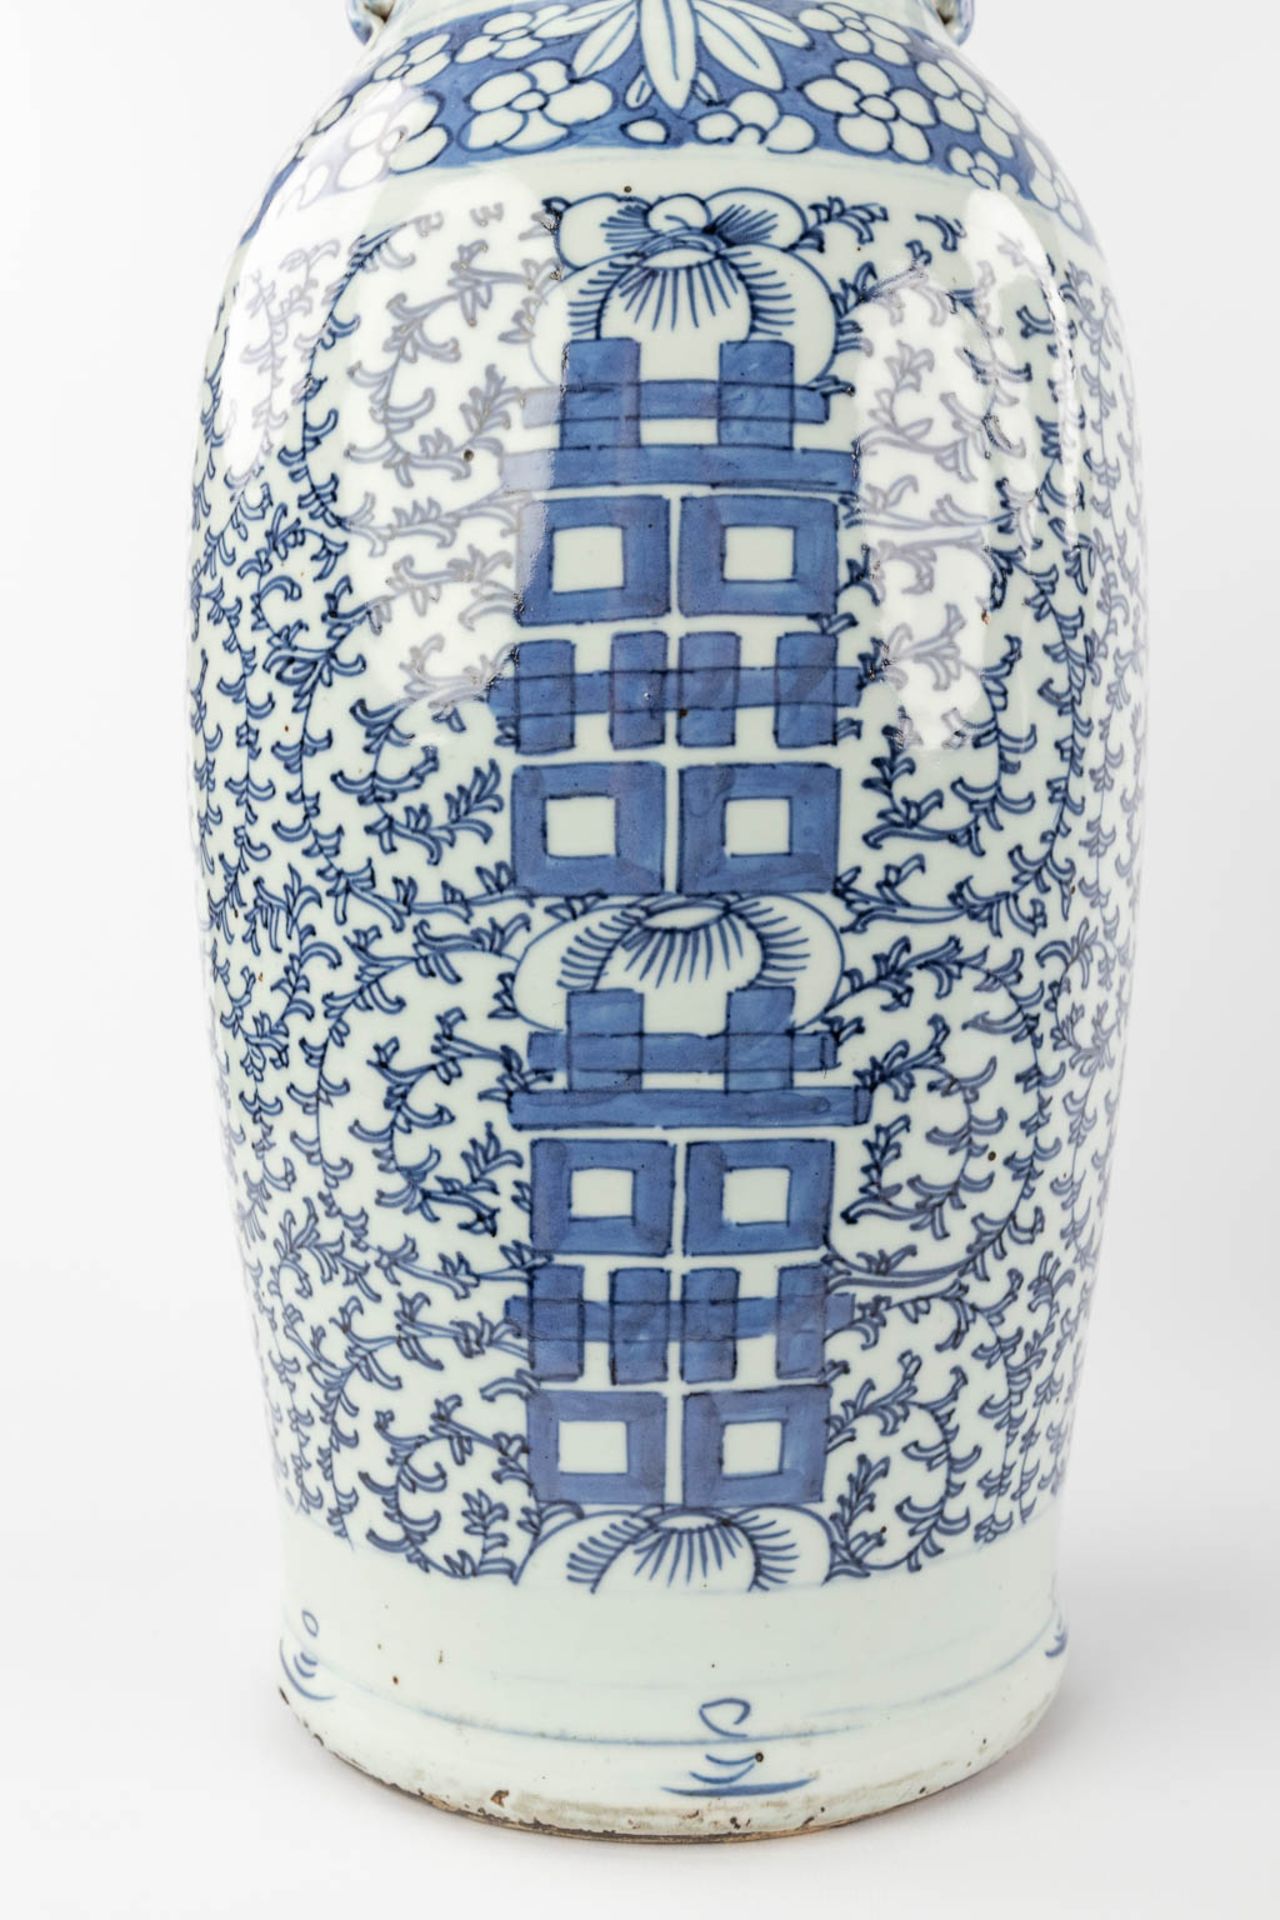 Two Chinese vases with blue-white double xi-sign of happiness. 19th/20th C. (H:60 x D:21 cm) - Image 12 of 12